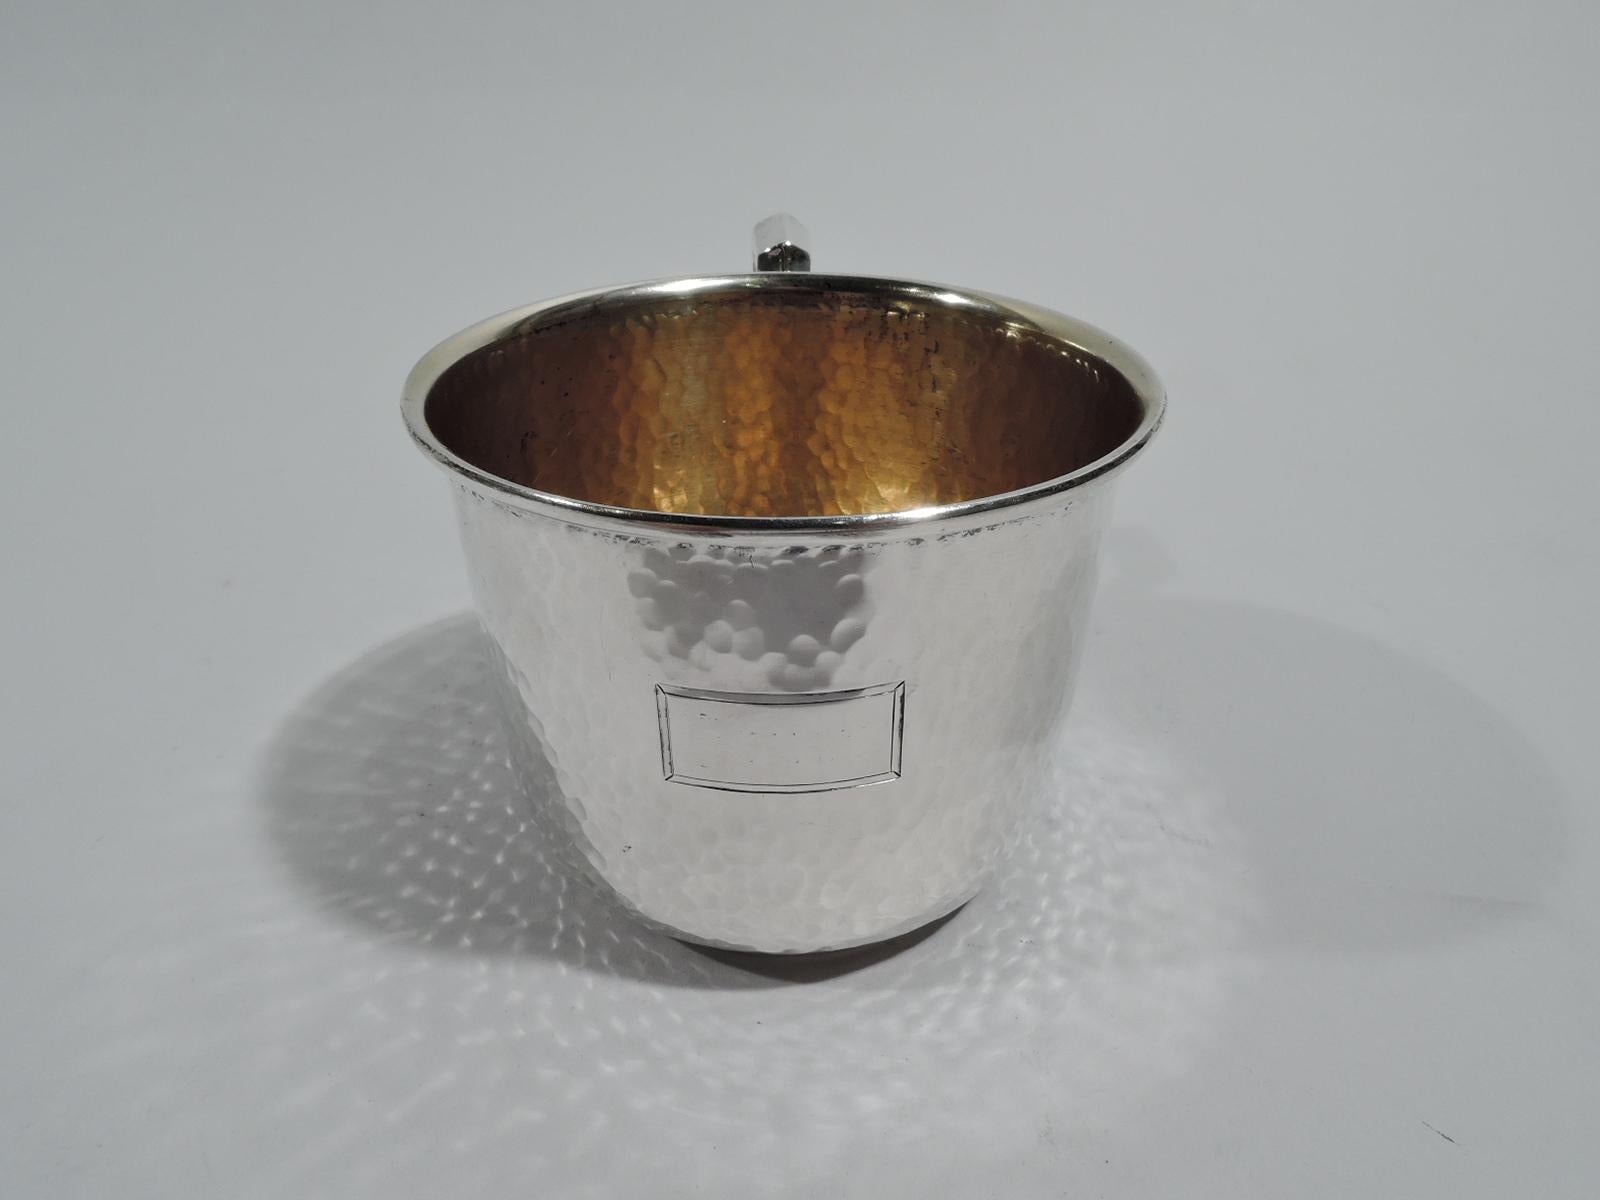 Craftsman sterling silver baby cup. Made by Watrous (part of International) in Wallingford, Conn., ca 1920. Straight sides with inset foot ring and scroll bracket handle. Allover hand hammering and plain rectangular cartouche (vacant). Gilt